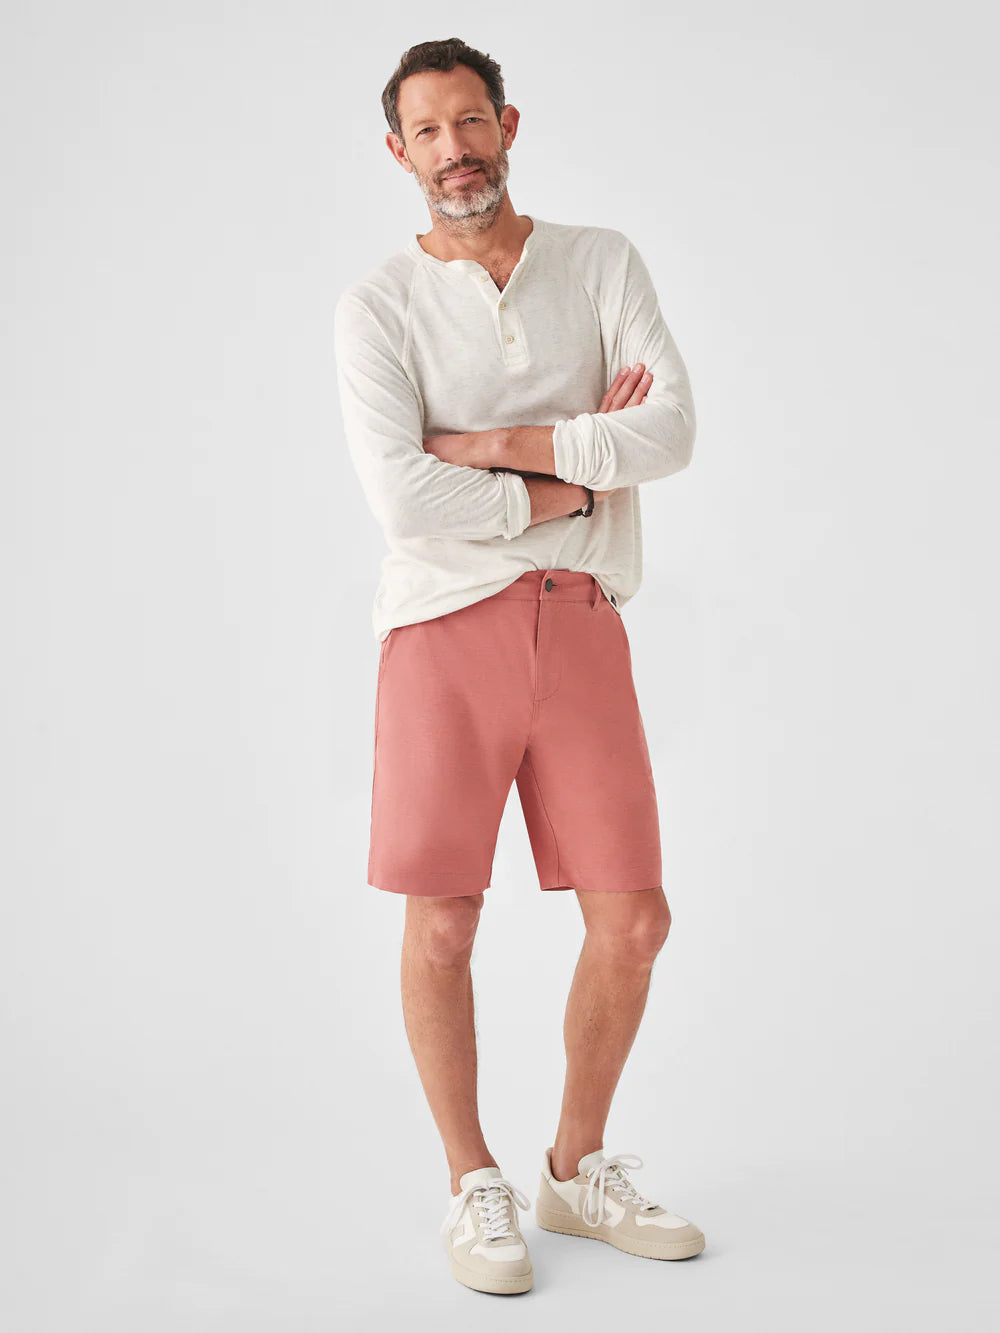 Faherty Men's Belt Loop All Day Shorts in Sunrose